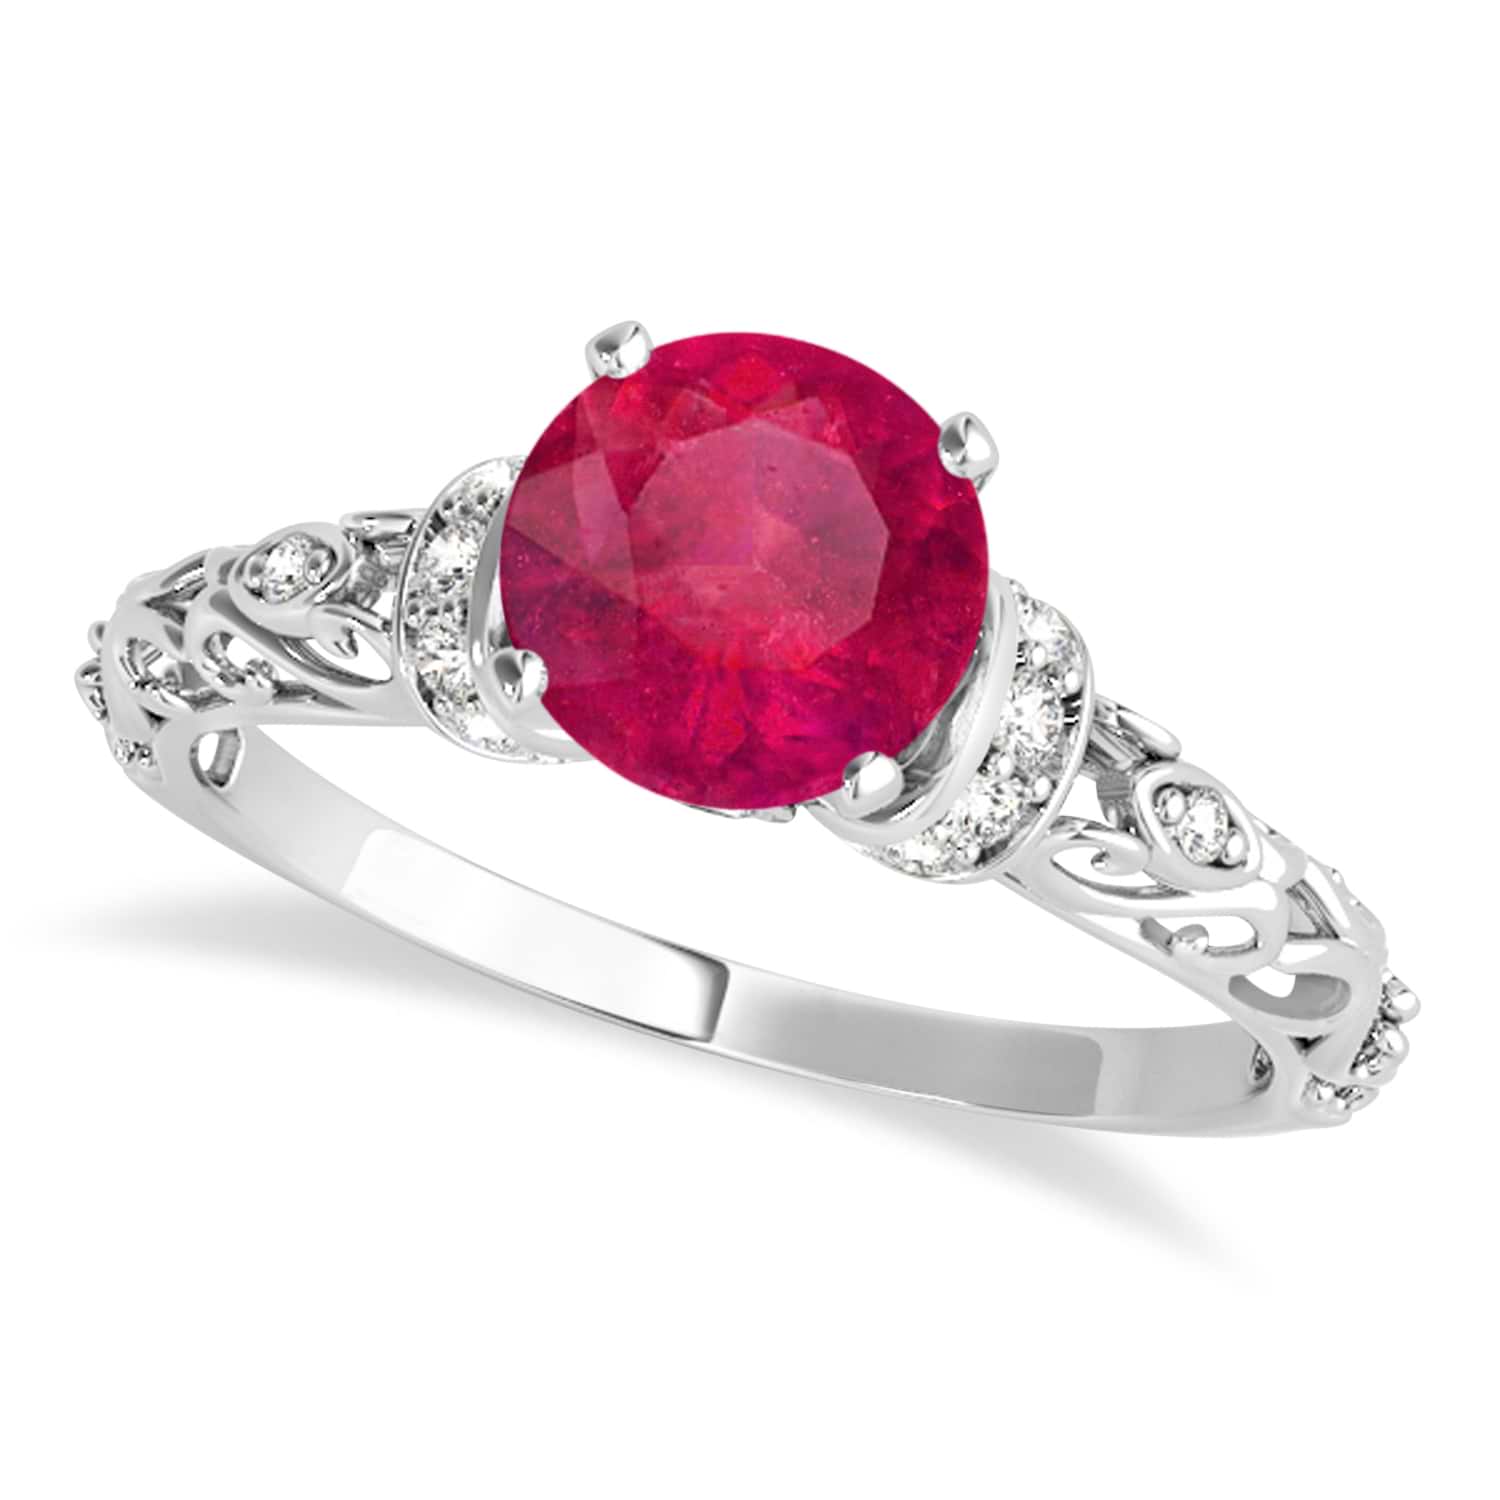 Ruby & Diamond Antique Style Engagement Ring 18k White Gold (1.62ct)